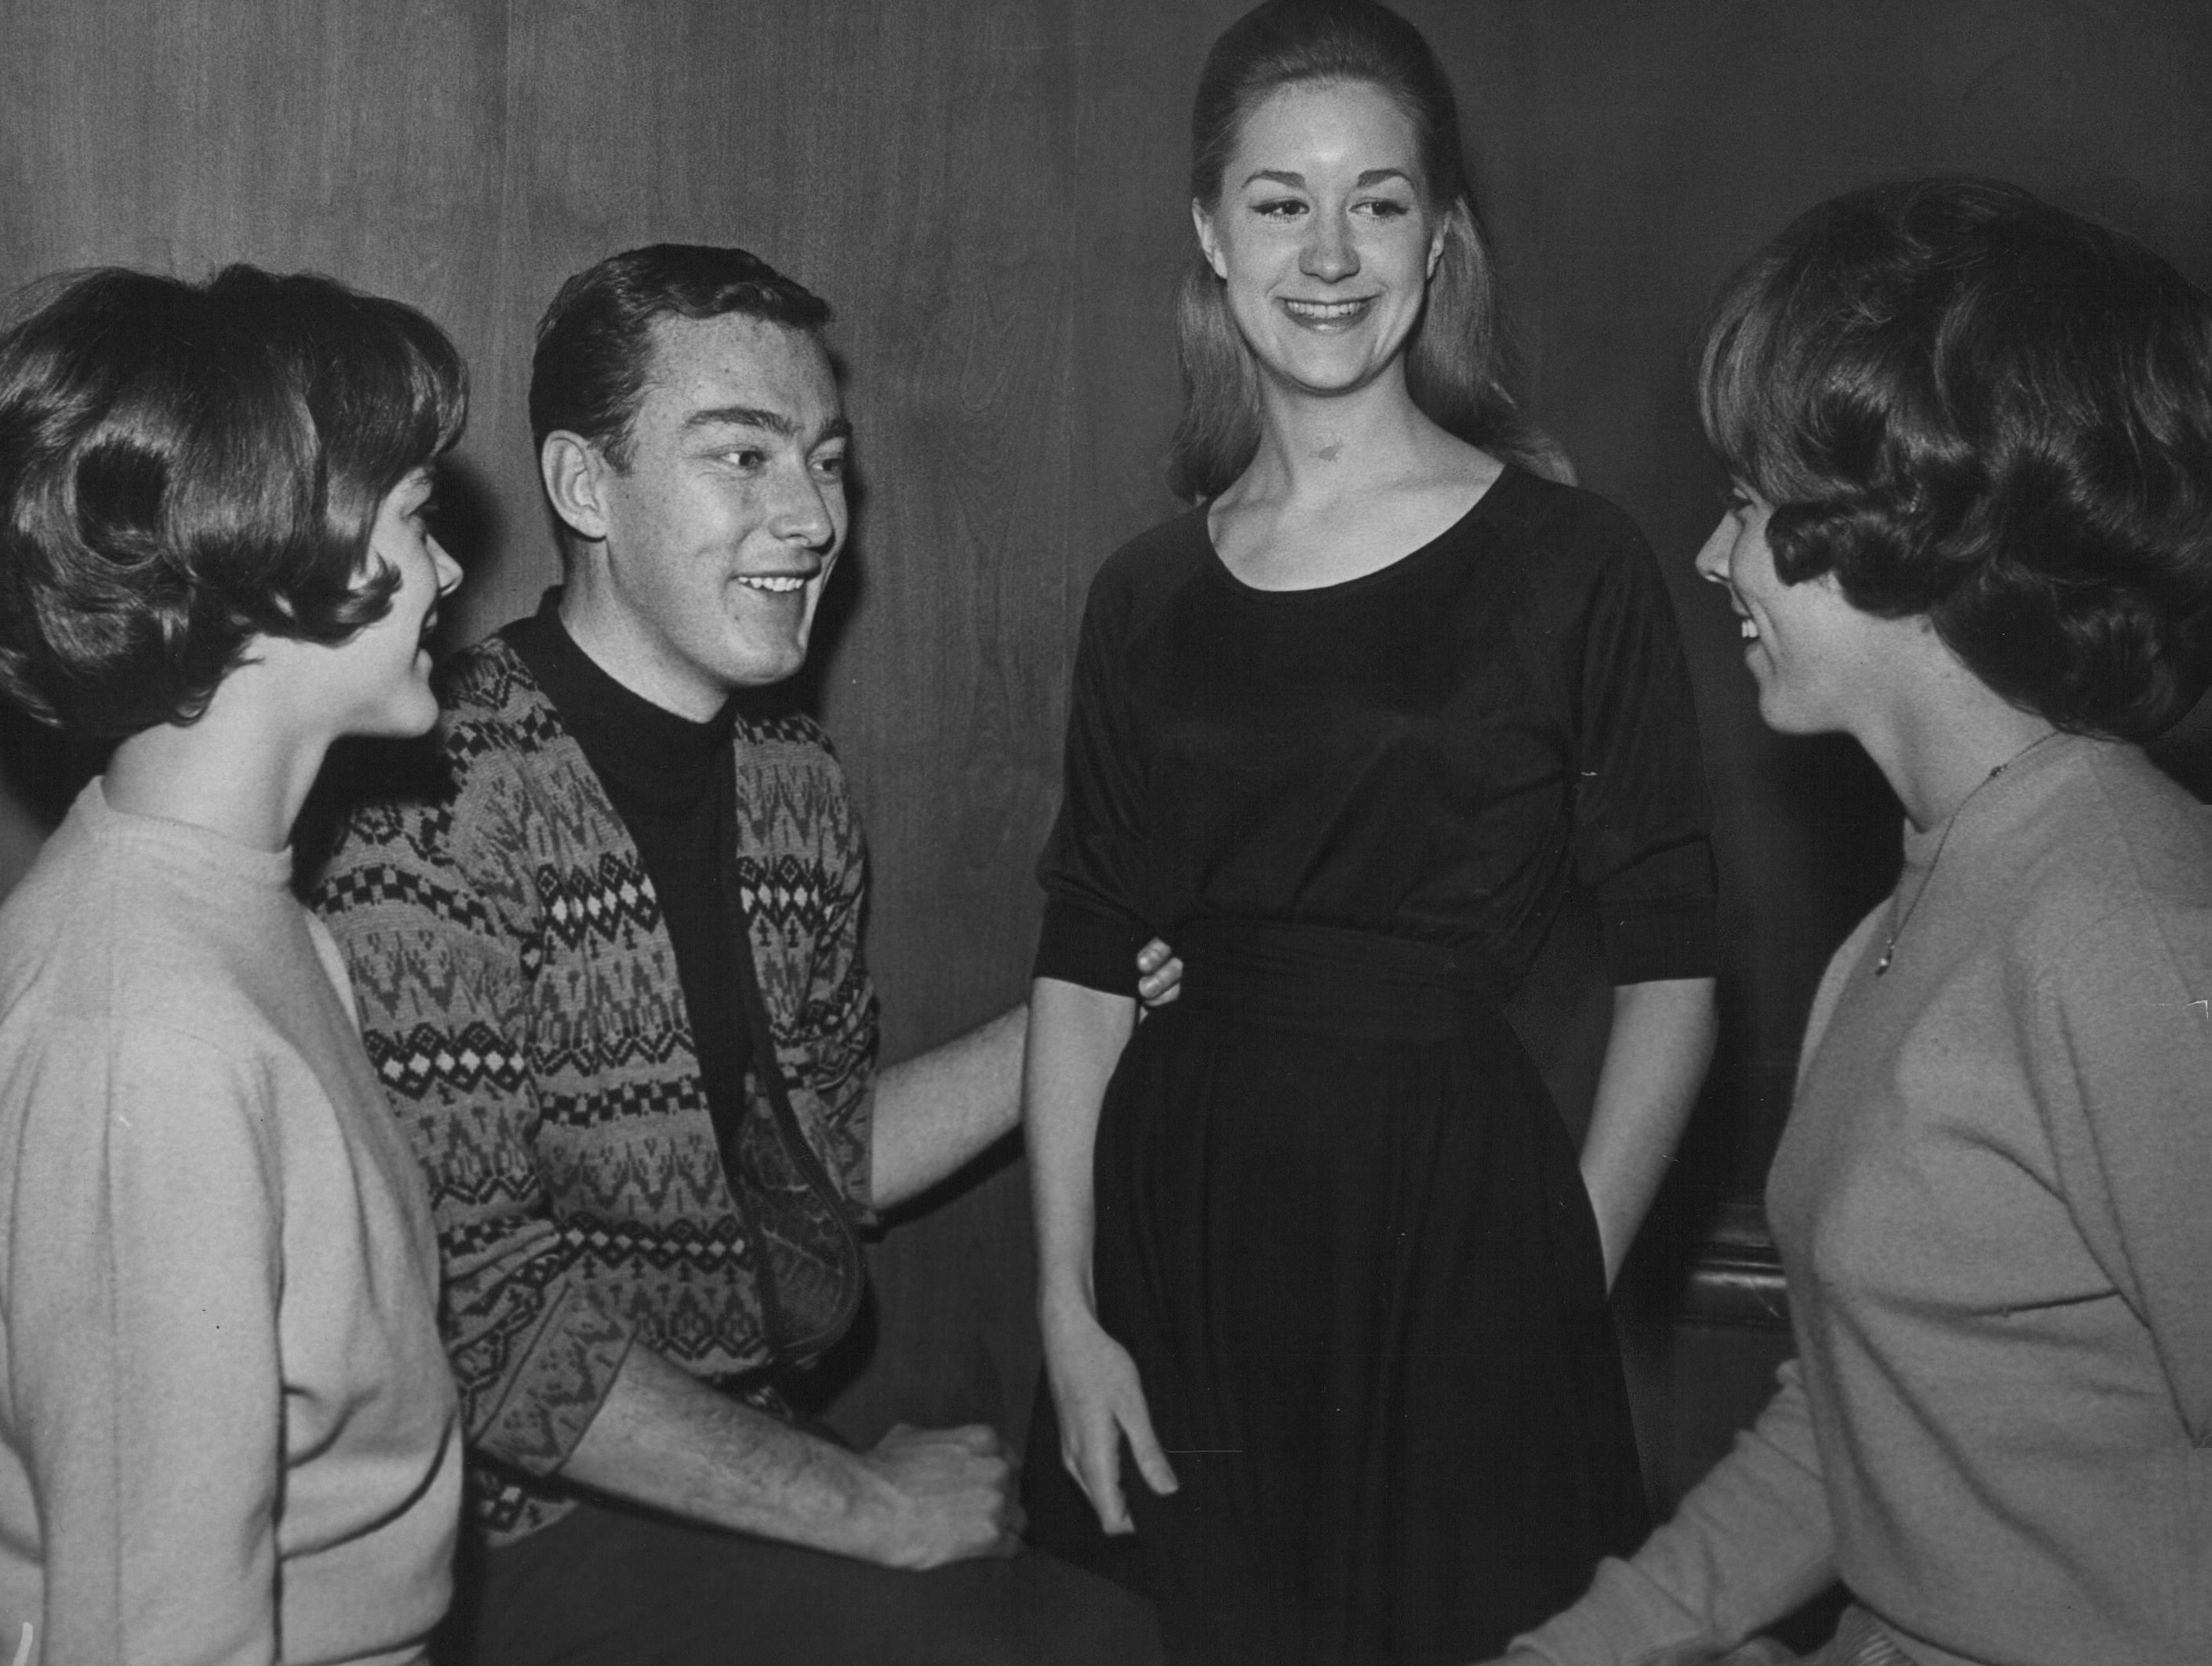 From (L-R) Susan Shermack, Dale Stuart, Joan Van Ark, and Judy Hickey attend a program for ushers at the Bonfils Theater on January 23, 1963 | Source: Getty Images